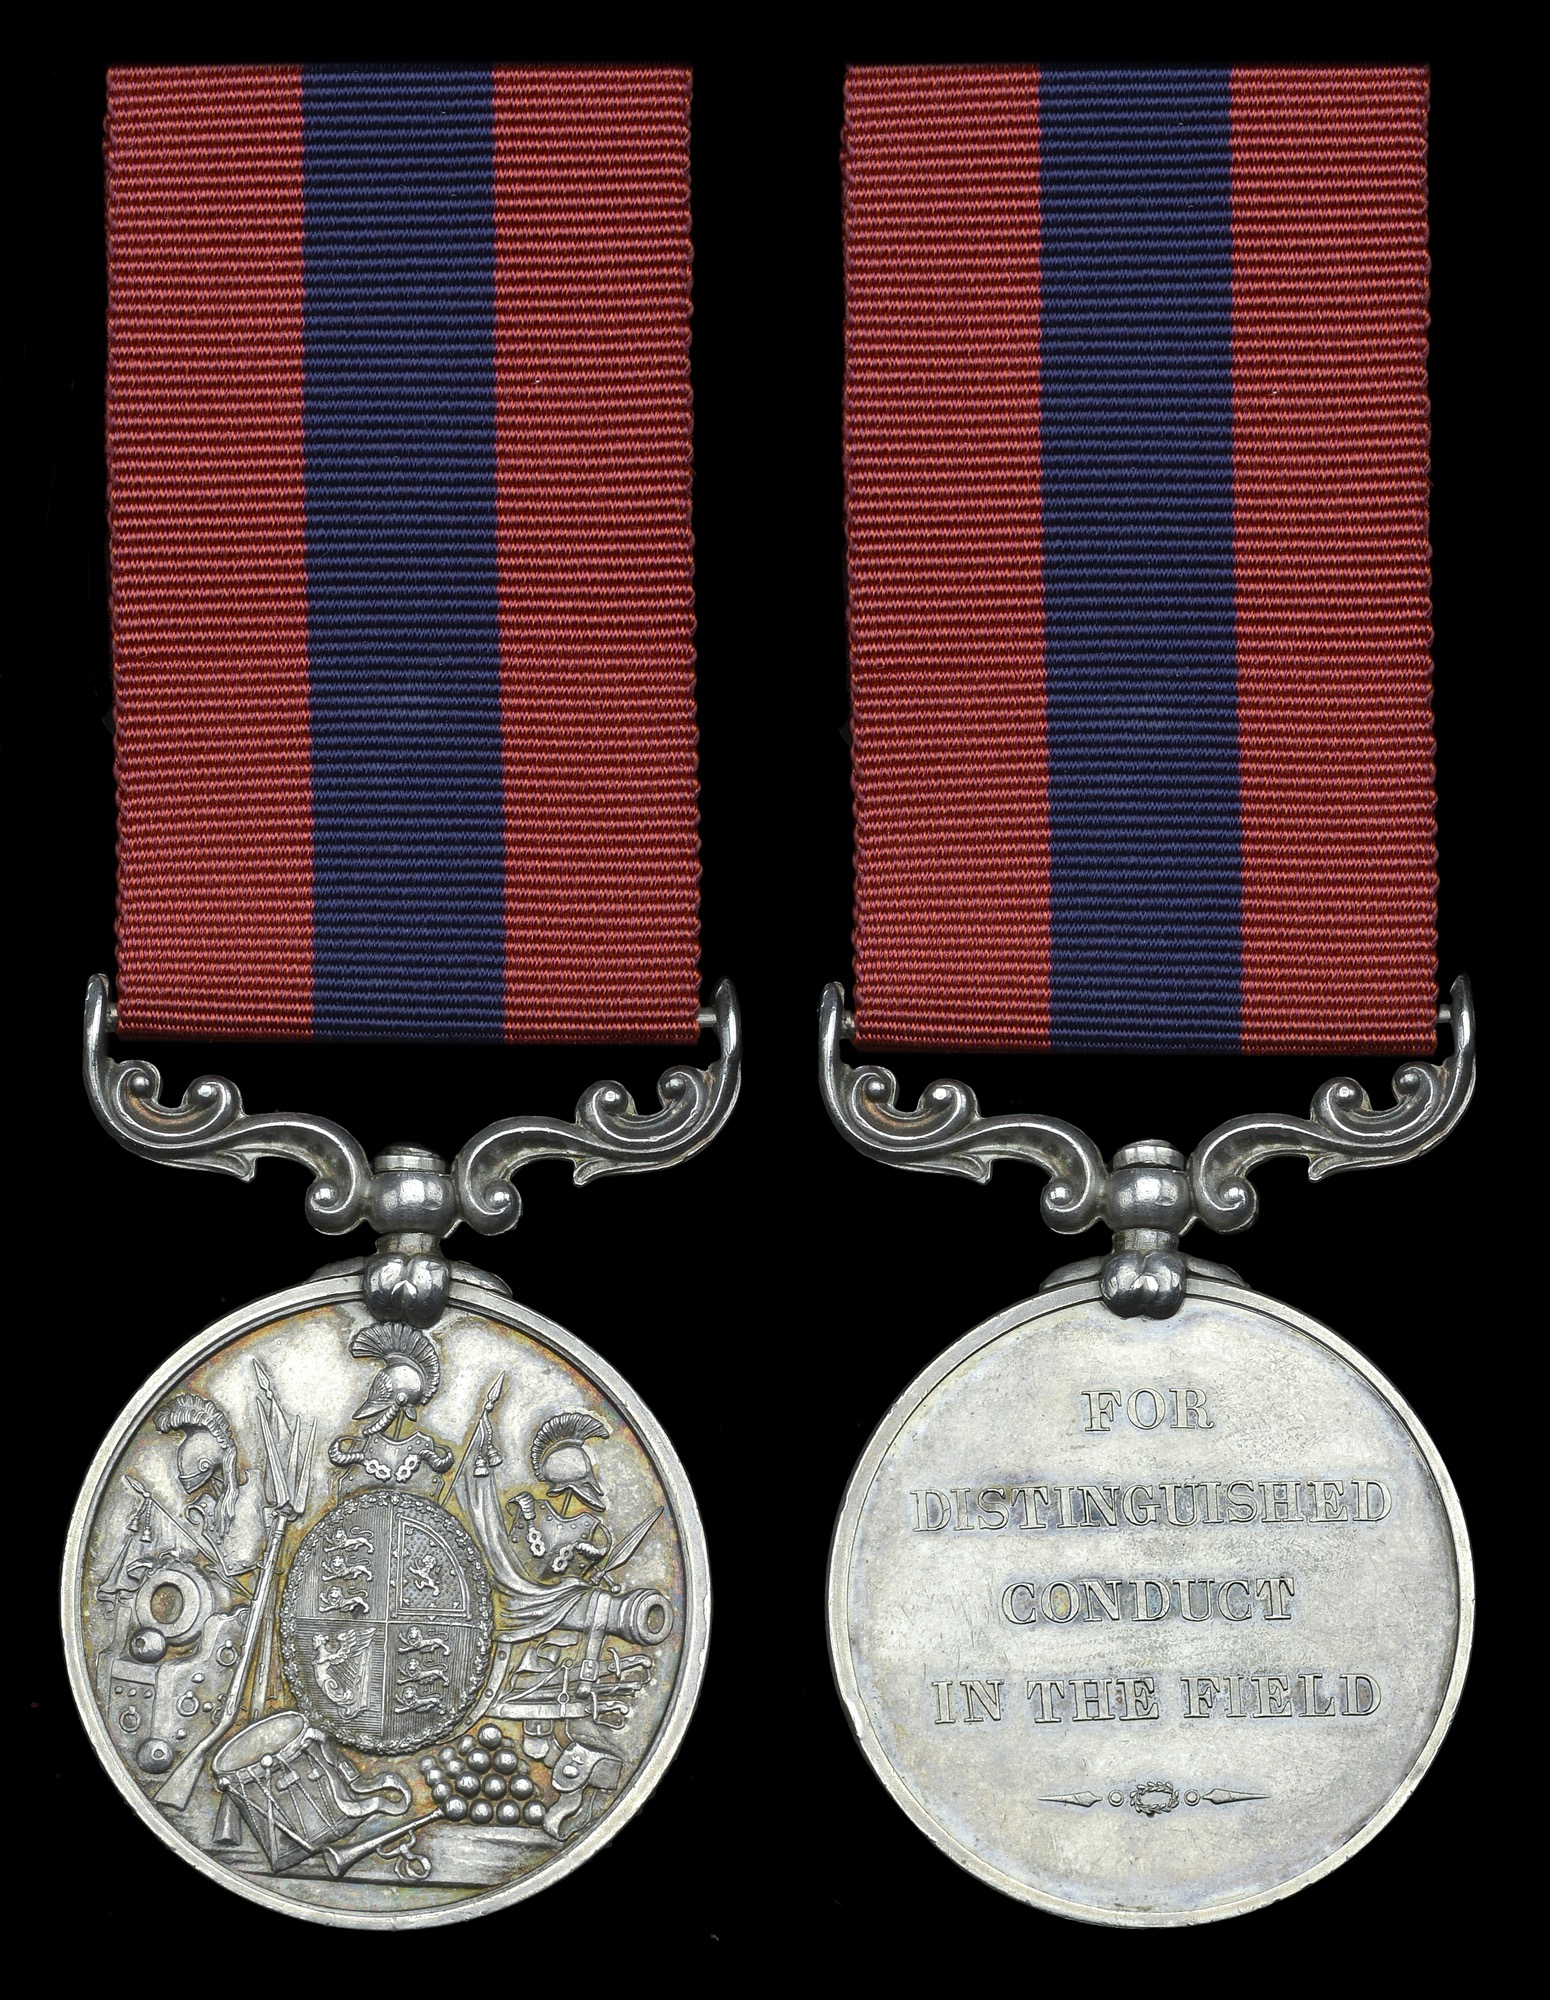 GROUPS AND SINGLE DECORATIONS FOR GALLANTRY